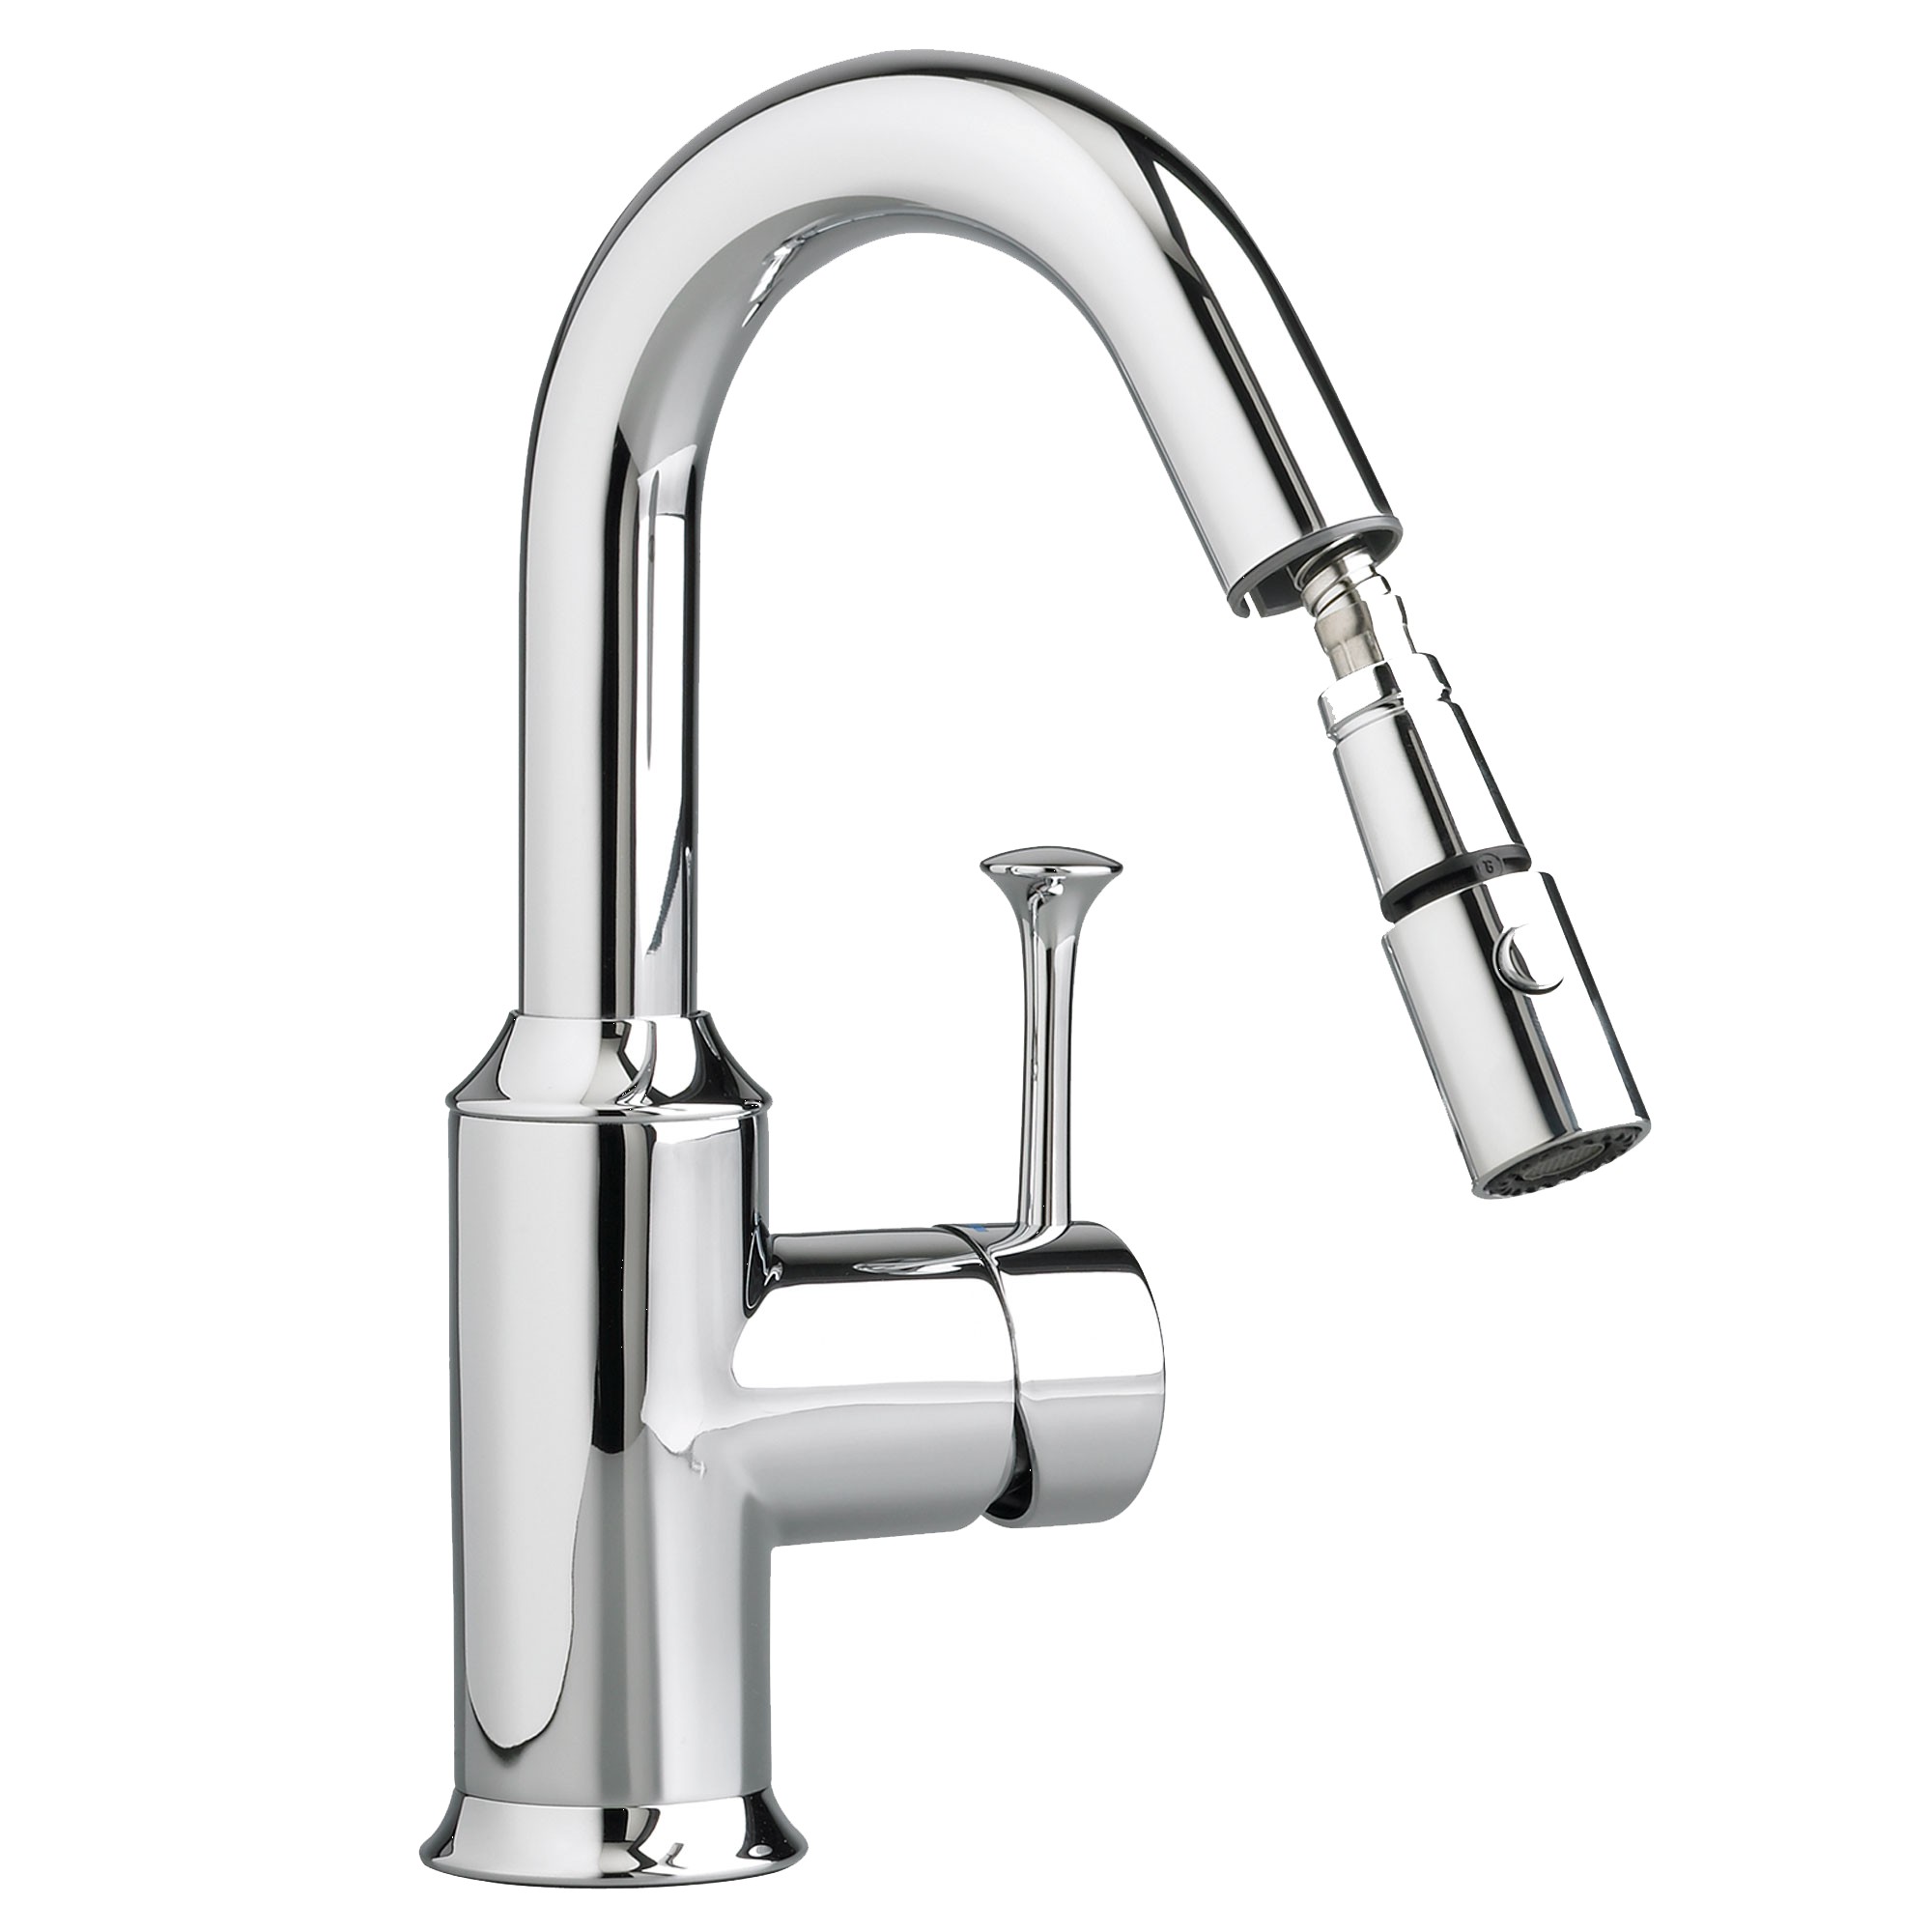 American Standard | 4332.410.002 | AMERICAN STANDARD 4332.410 PEKOE SINGLE-LEVER PULL-OUT FAUCET CP 002 CHROME